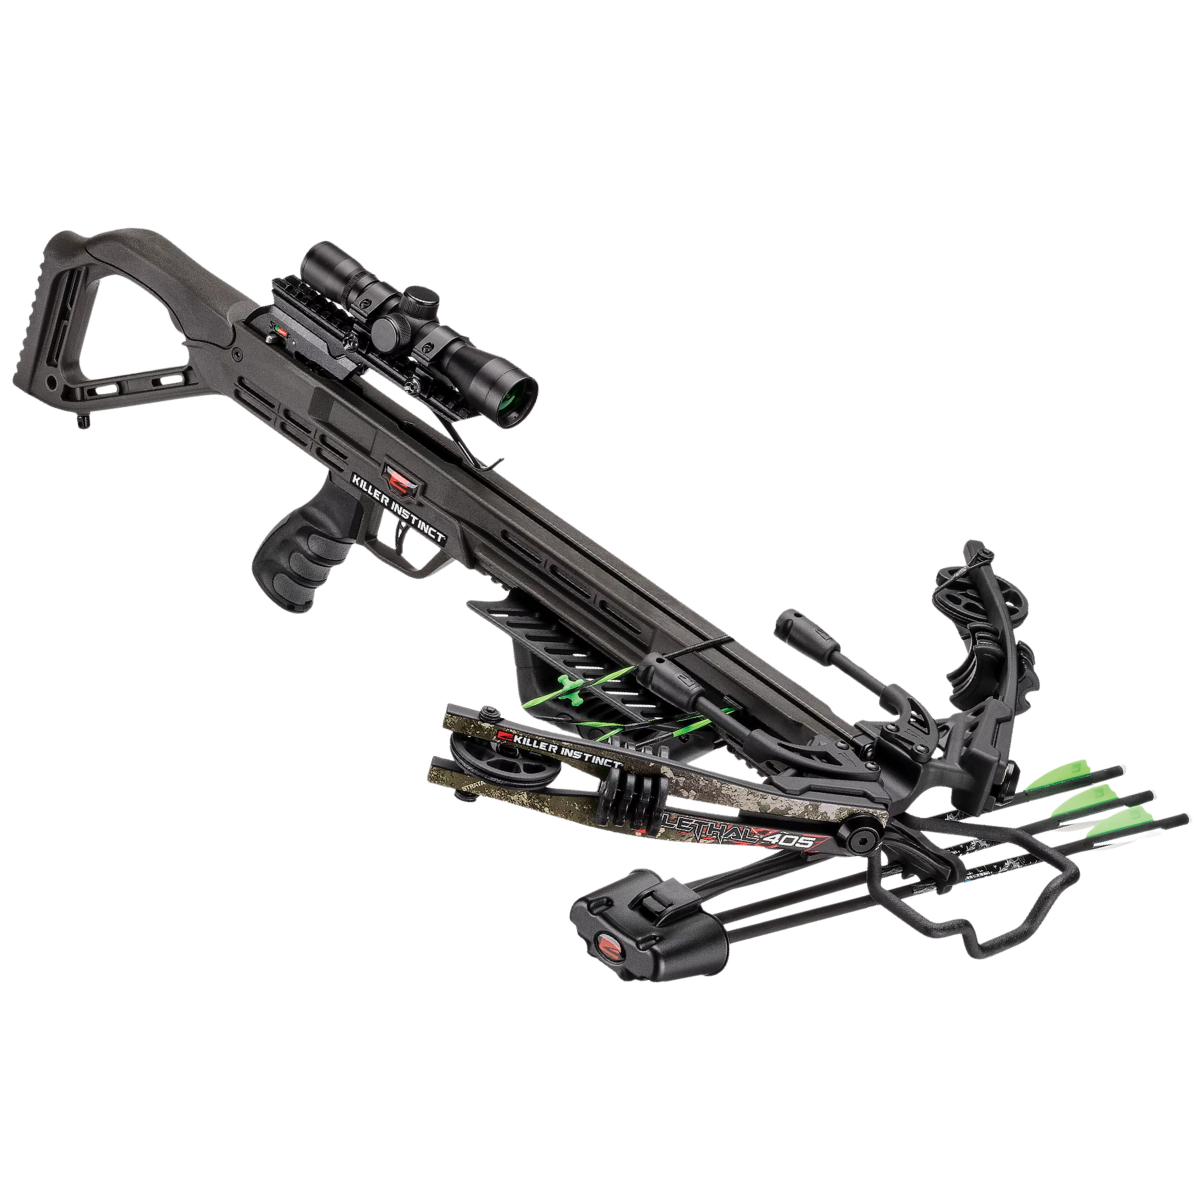 Killer Instinct Lethal 405 Crossbow Pro Package True Timber Strata 405fps - Fast UK Shipping | Tactical Archery UK